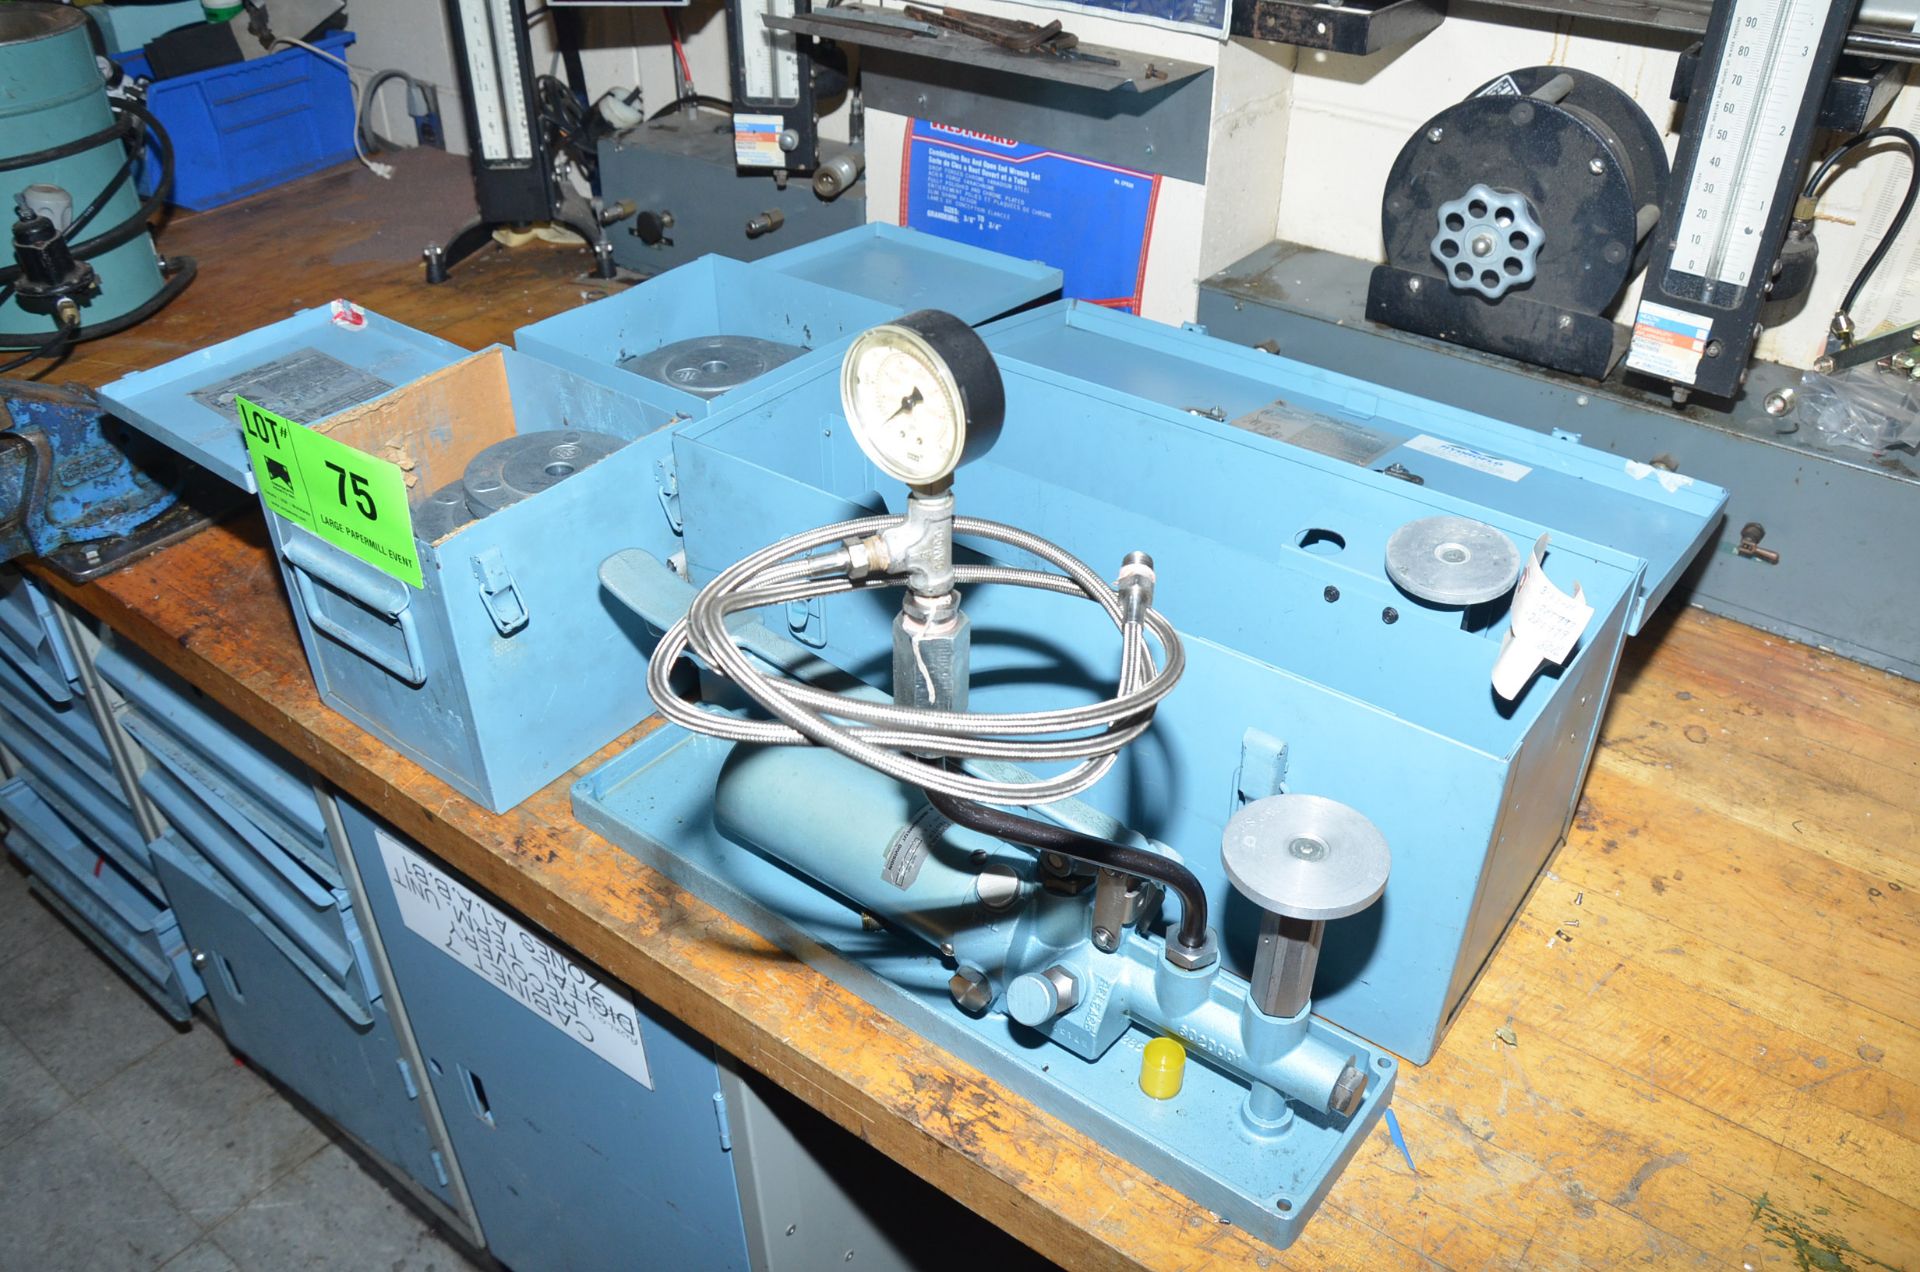 DRESSER TYPE 1305 ASHCROFT PORTABLE DEAD-WEIGHT TESTER WITH 10,000PSI CAPACITY, S/N: M5081 [ - Image 2 of 3